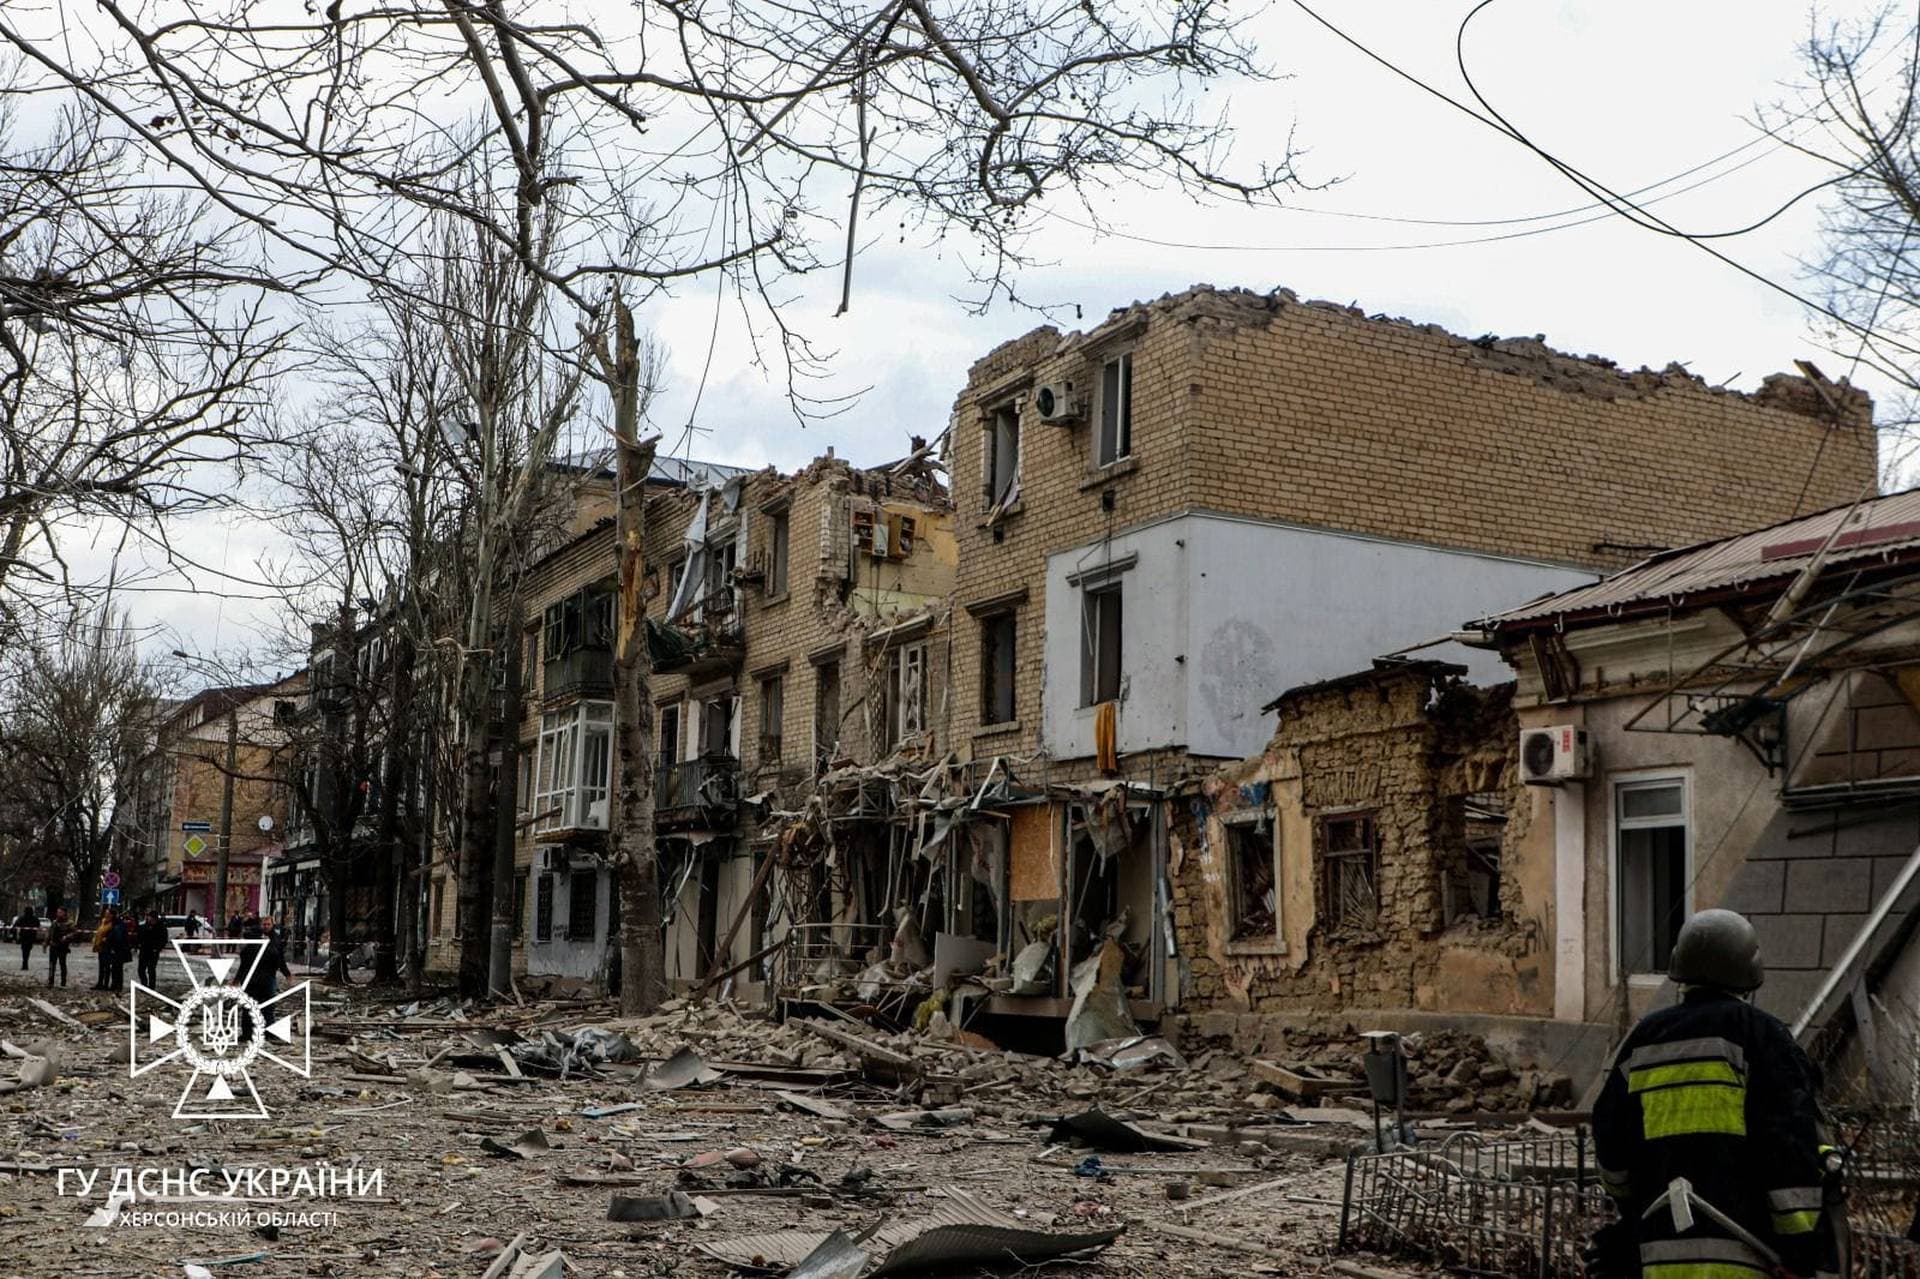 Consequences of the Russian attack on Kherson on February 2